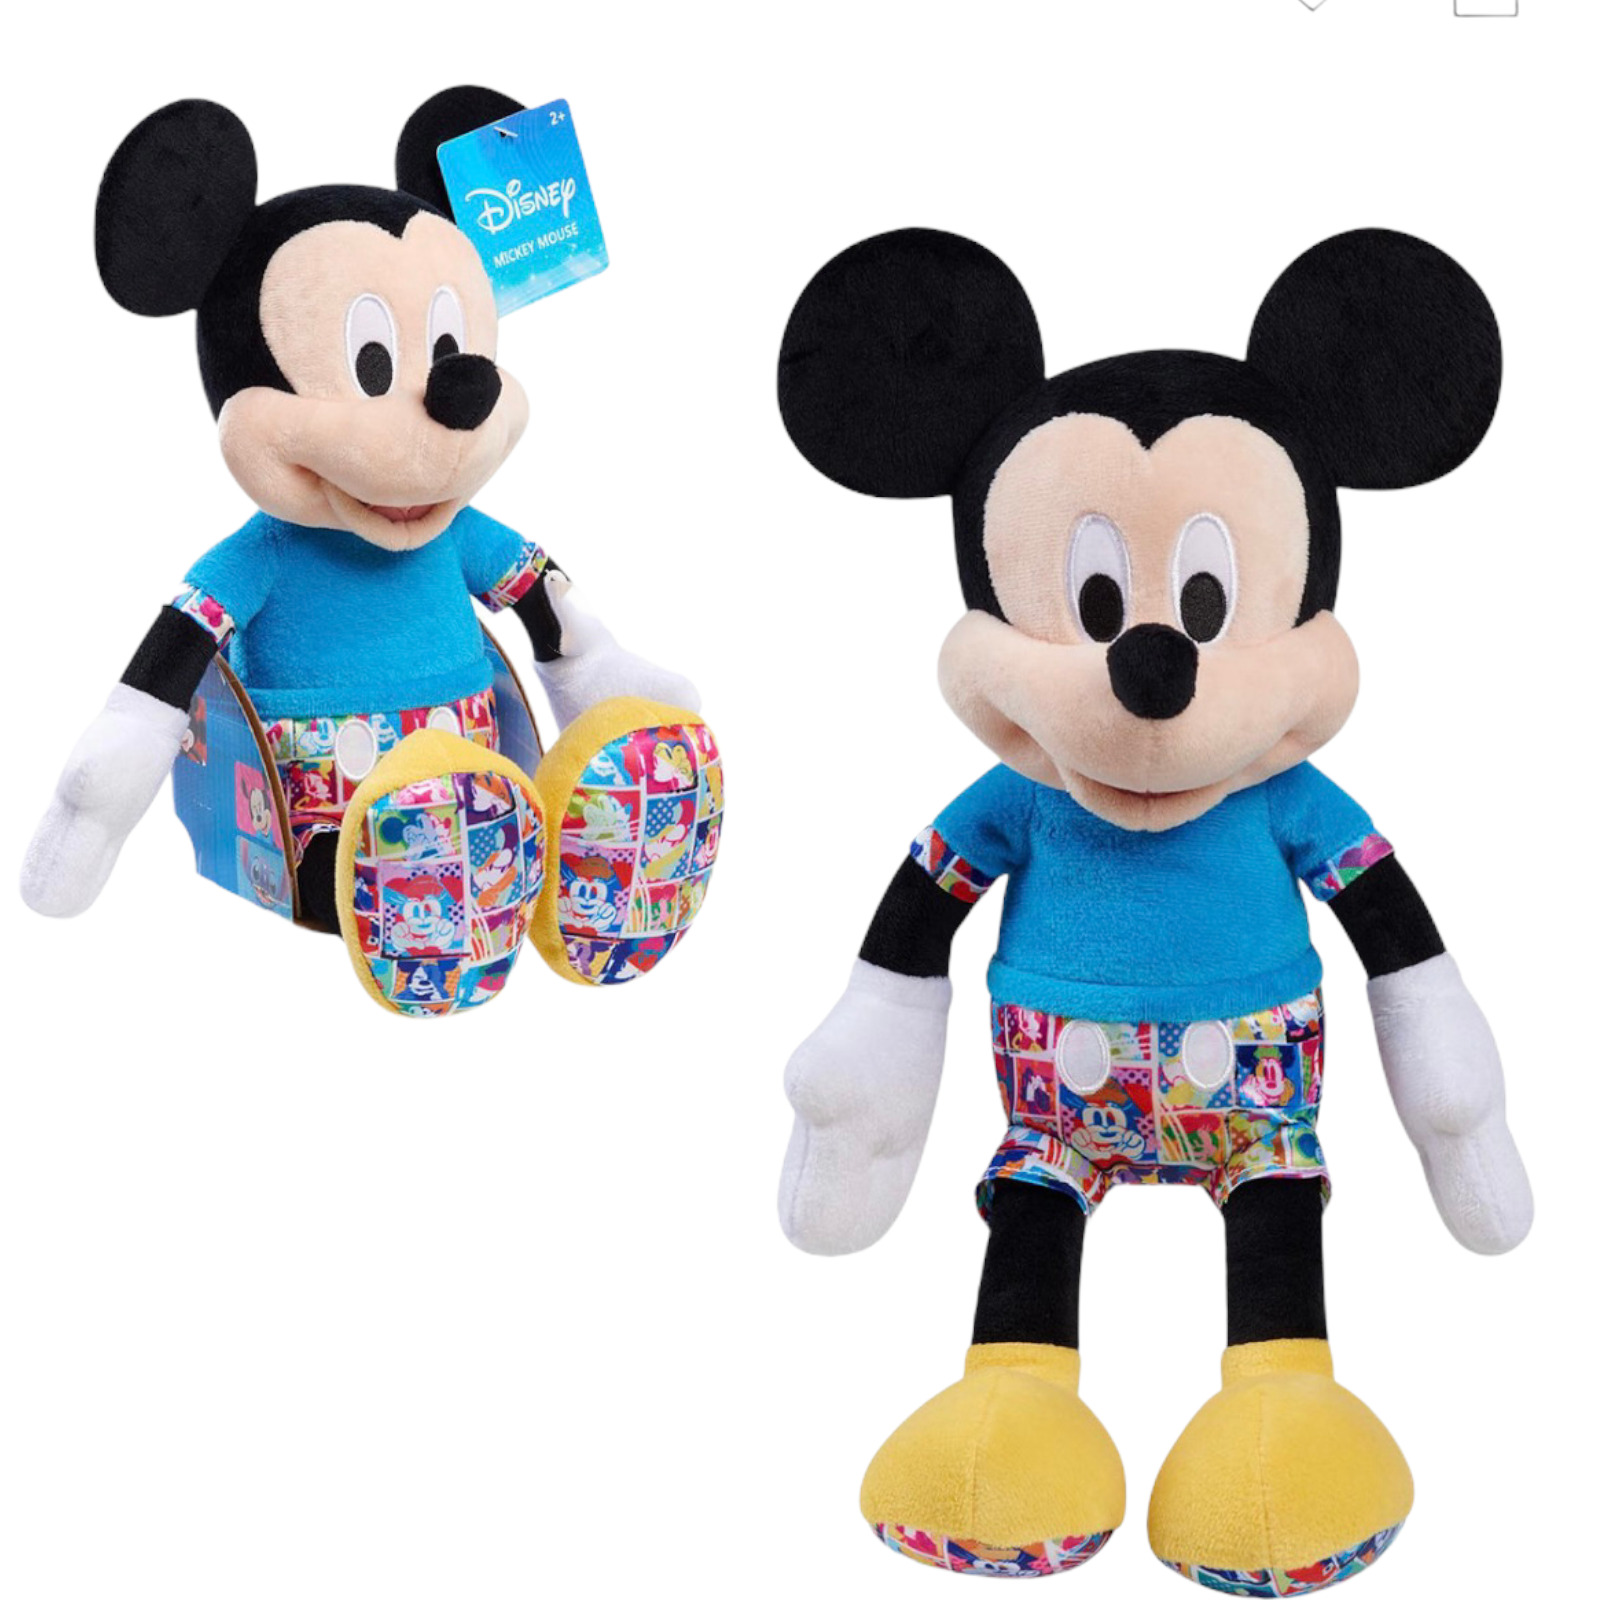 Disney Classics Mickey Mouse Perfect for kids